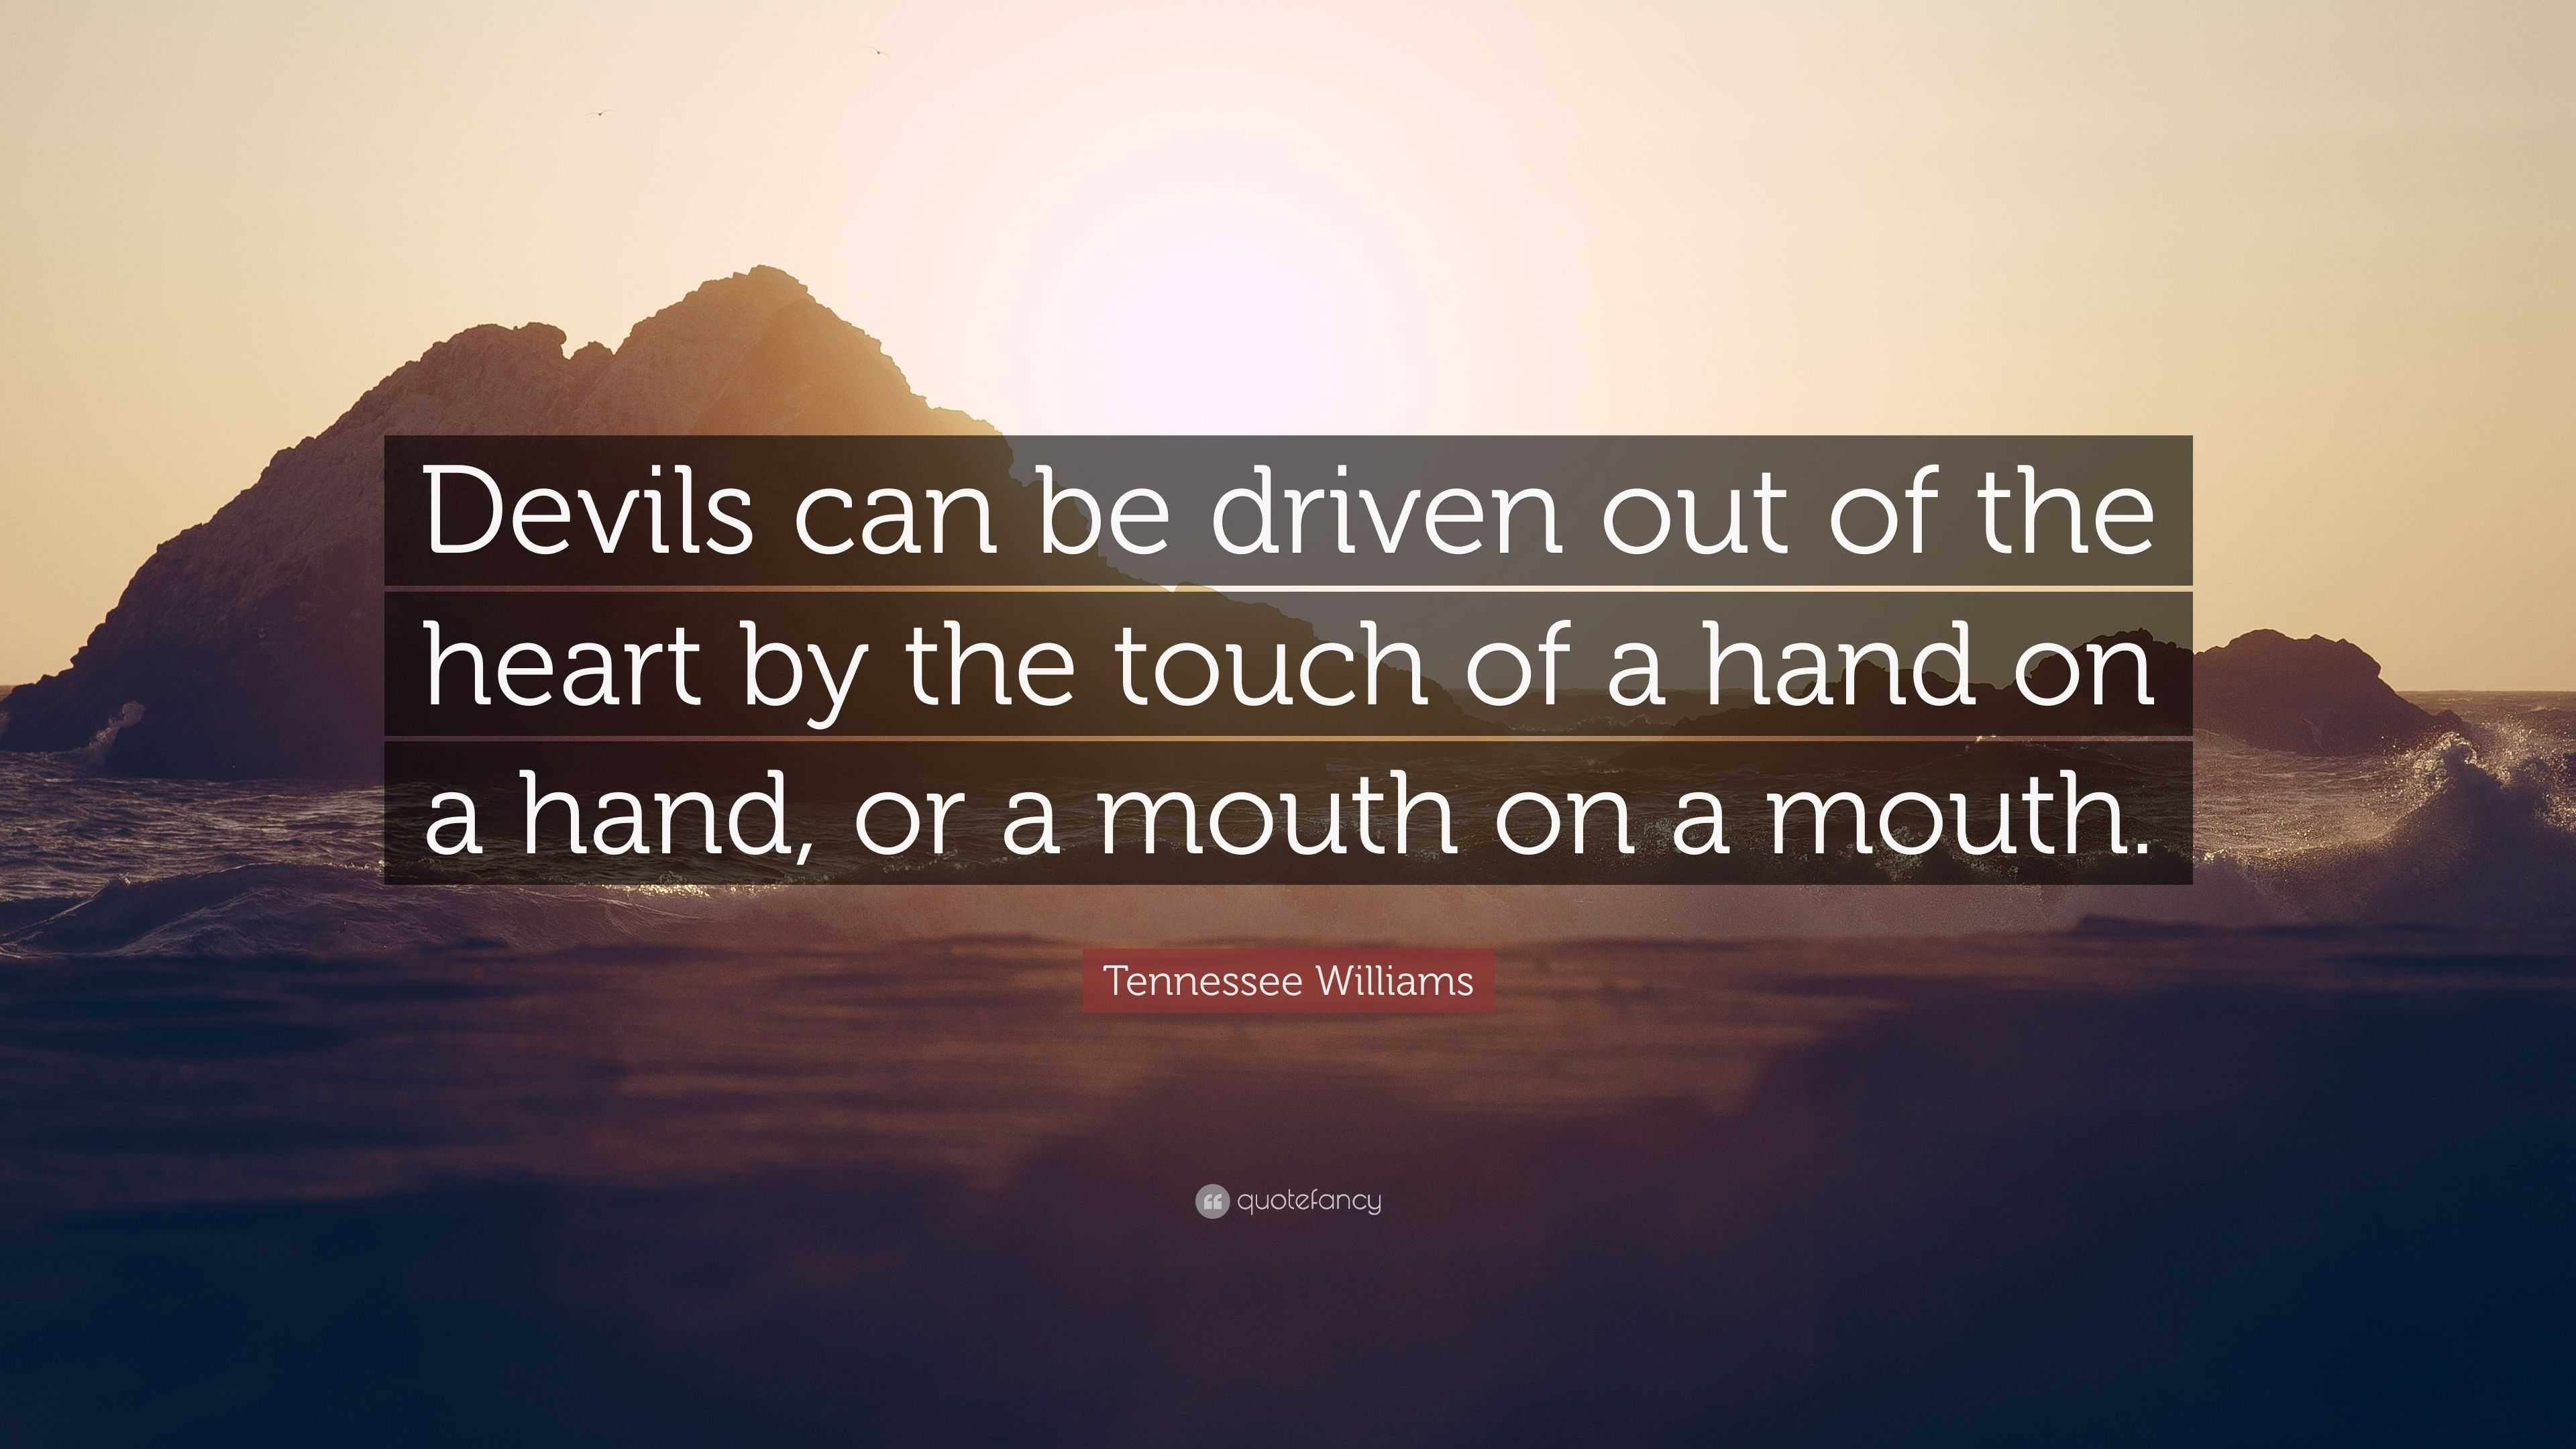 Tennessee Williams Quote: "Devils can be driven out of the ...